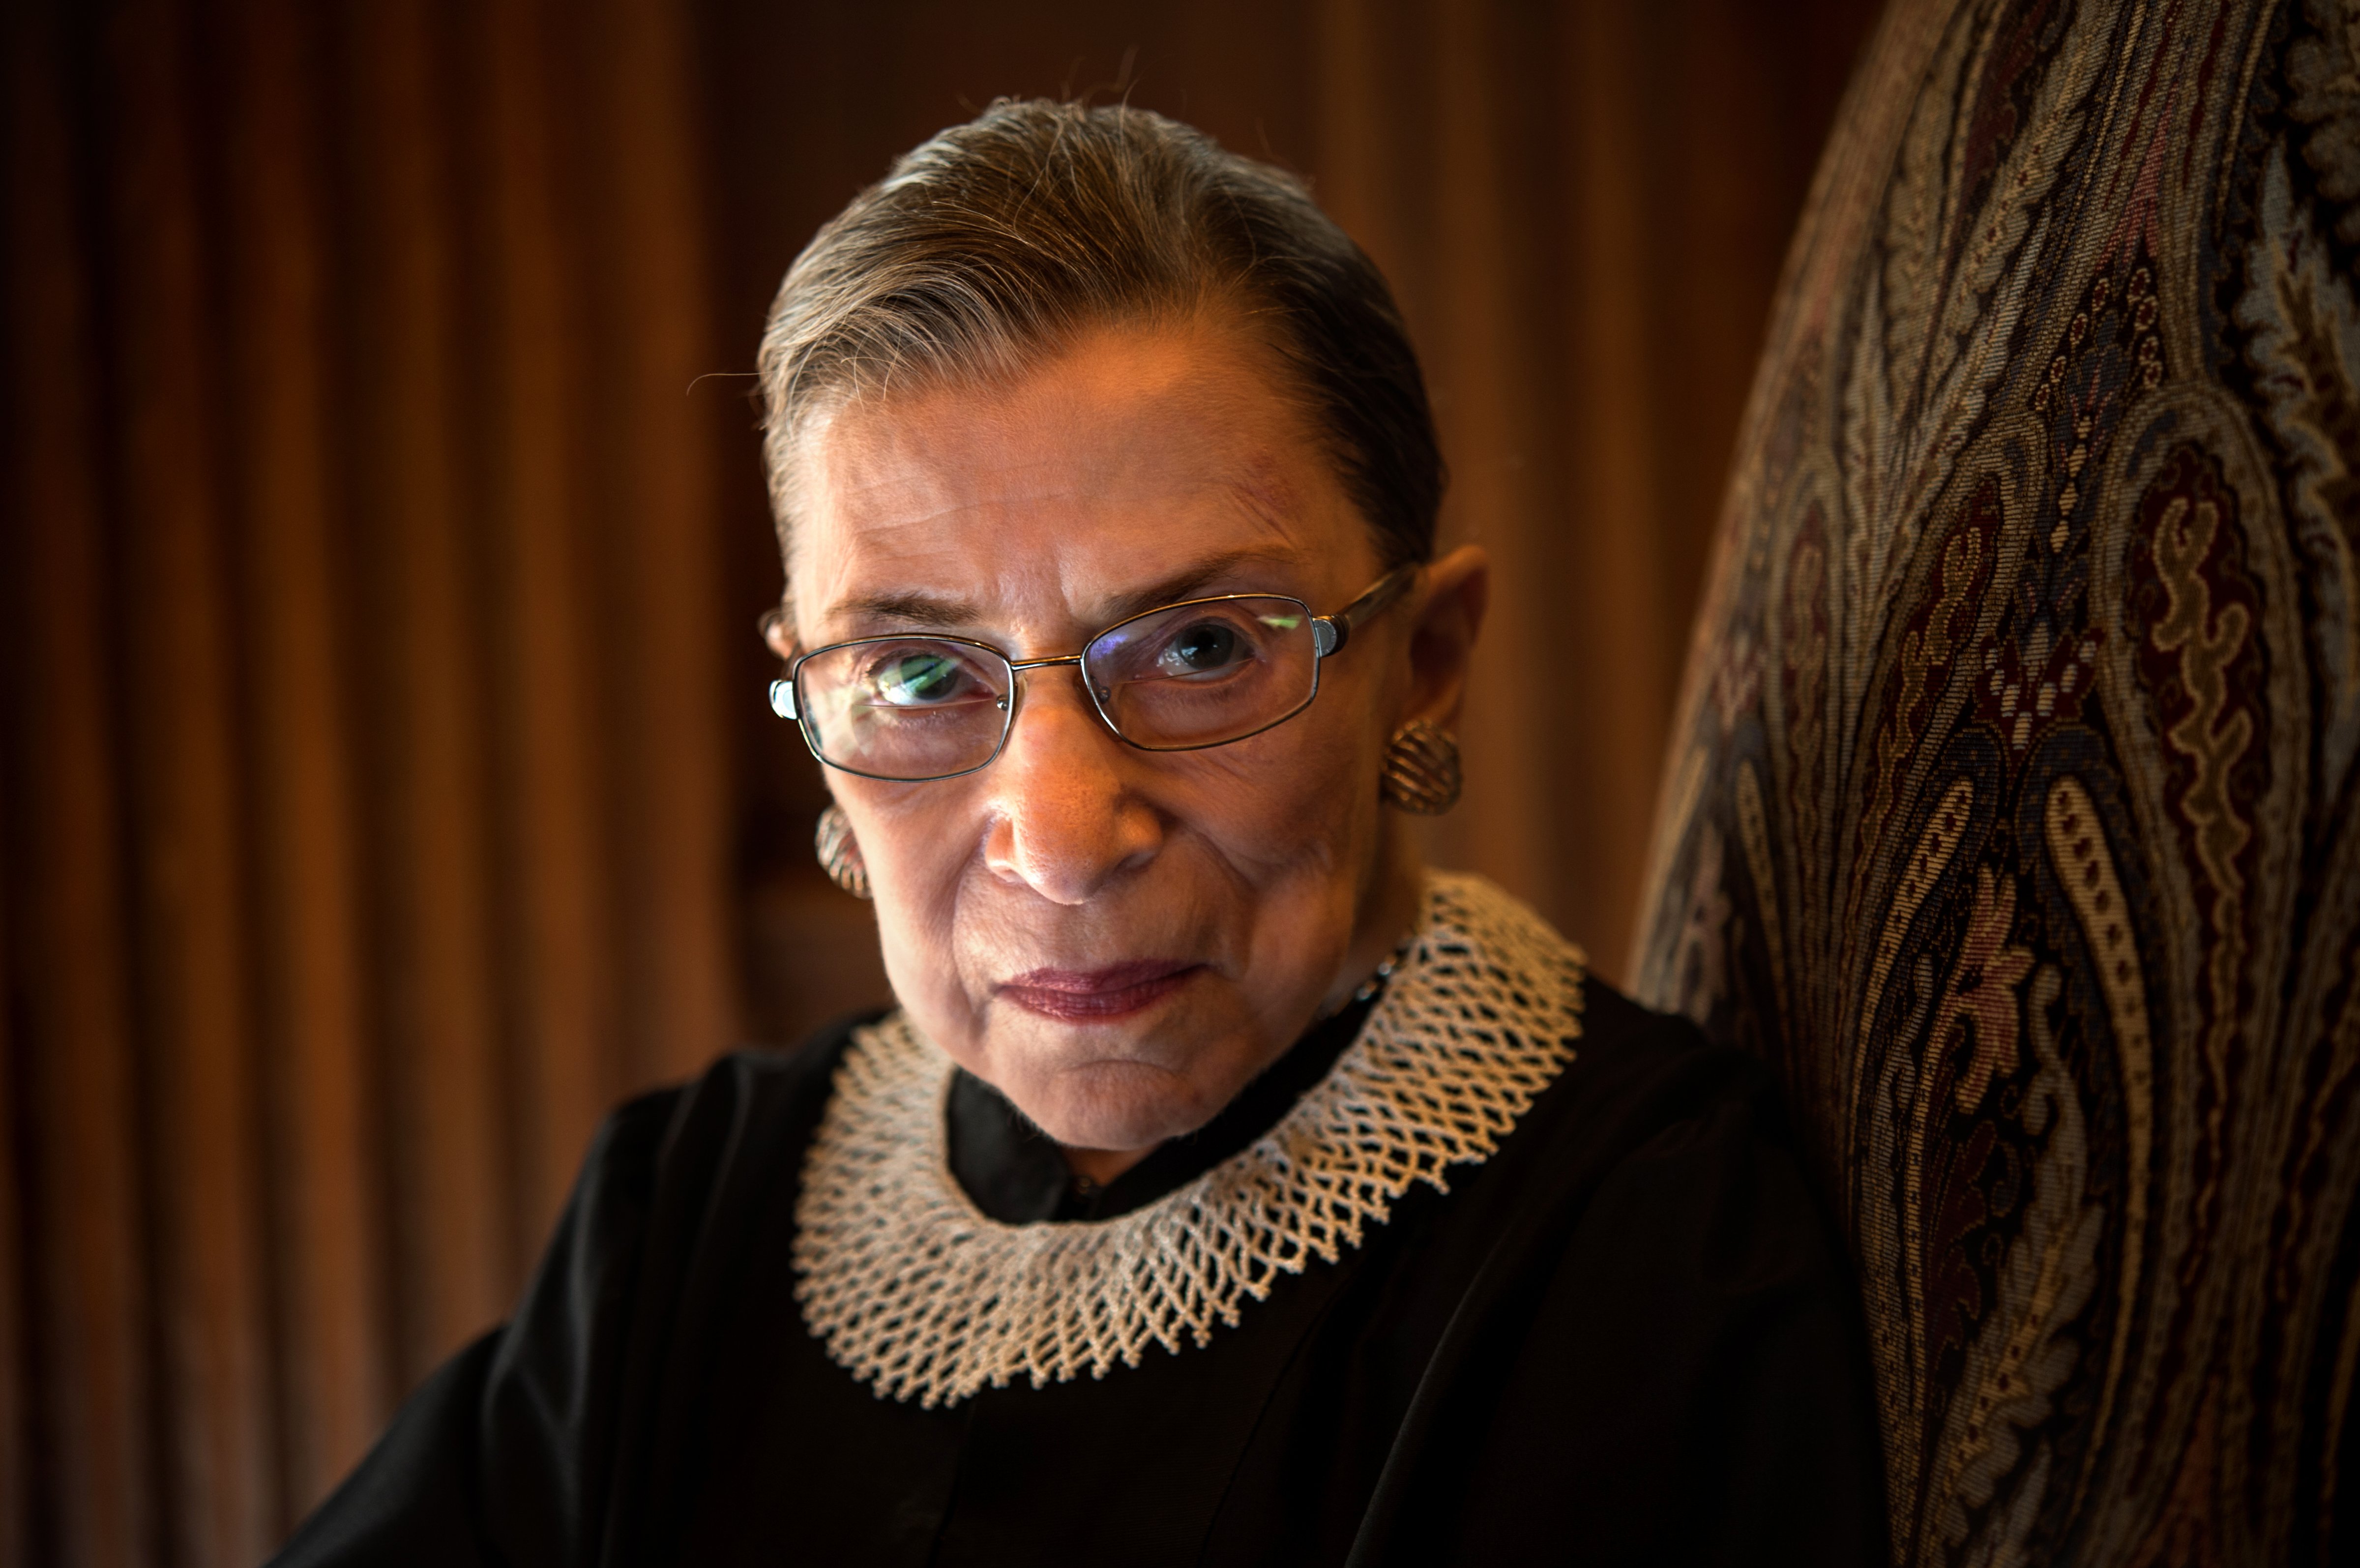 Supreme Court Justice Ruth Bader Ginsburg, celebrating her 20th anniversary on the bench, is photographed in the West conference room at the U.S. Supreme Court in Washington, D.C., on Friday, August 30, 2013. (Photo by Nikki Kahn/The Washington Post via Getty Images) (The Washington Post&mdash;The Washington Post/Getty Images)